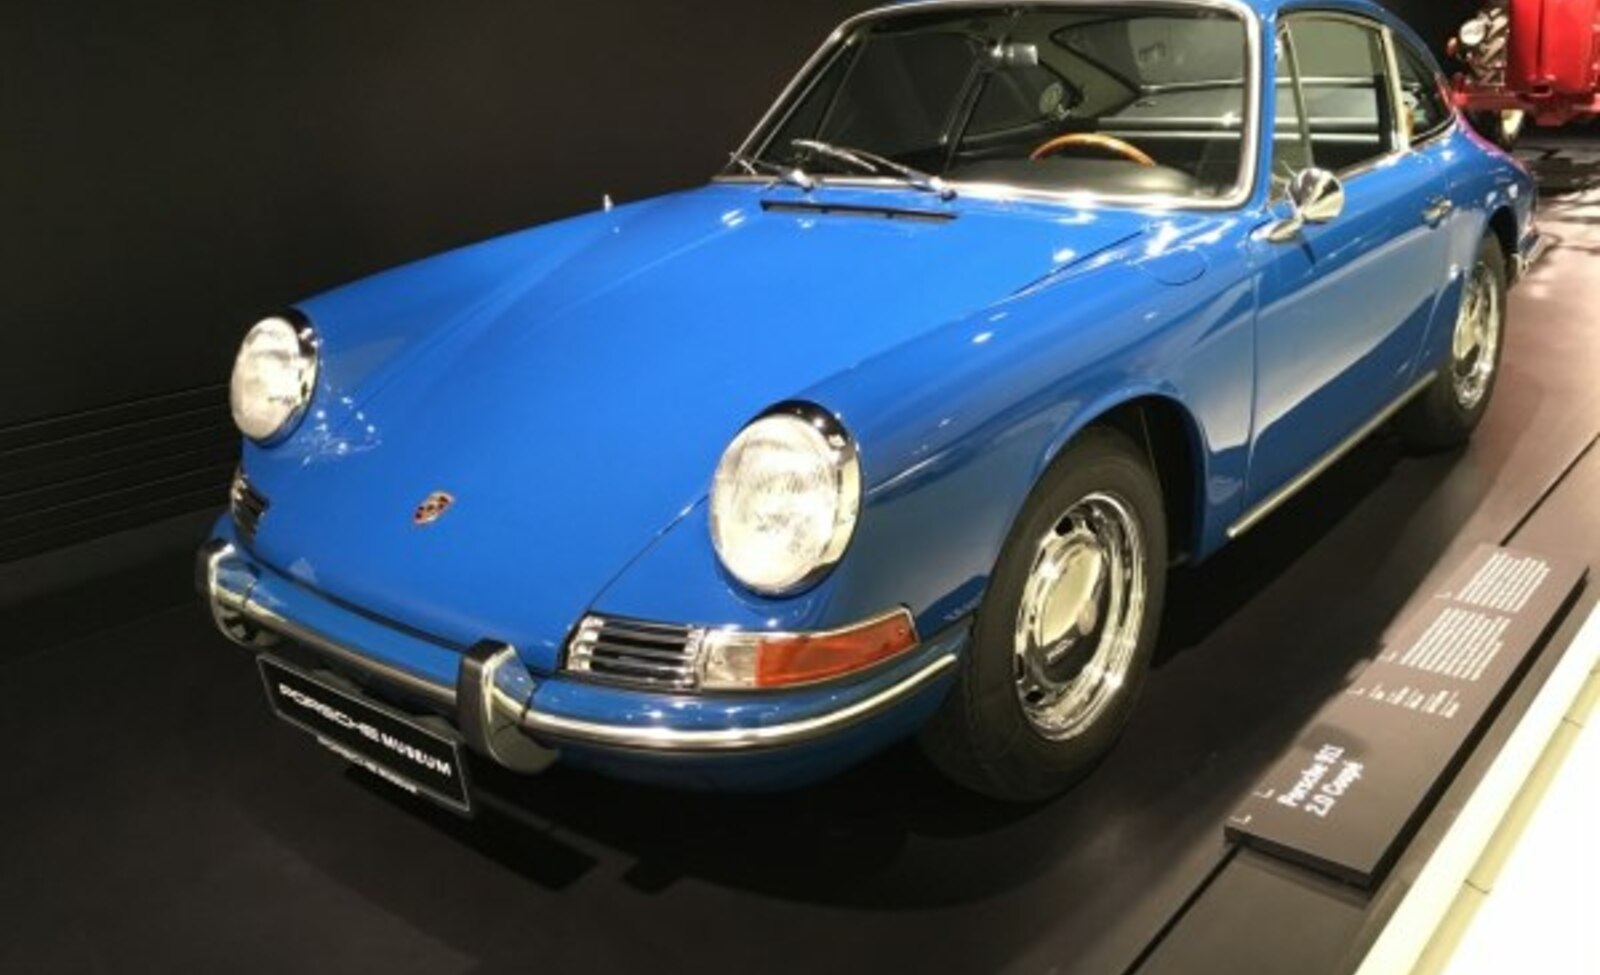 Porsche 911  (218 Hp) 1986, 1987, 1988, 1989 specifications, prices &  reviews | XEZii